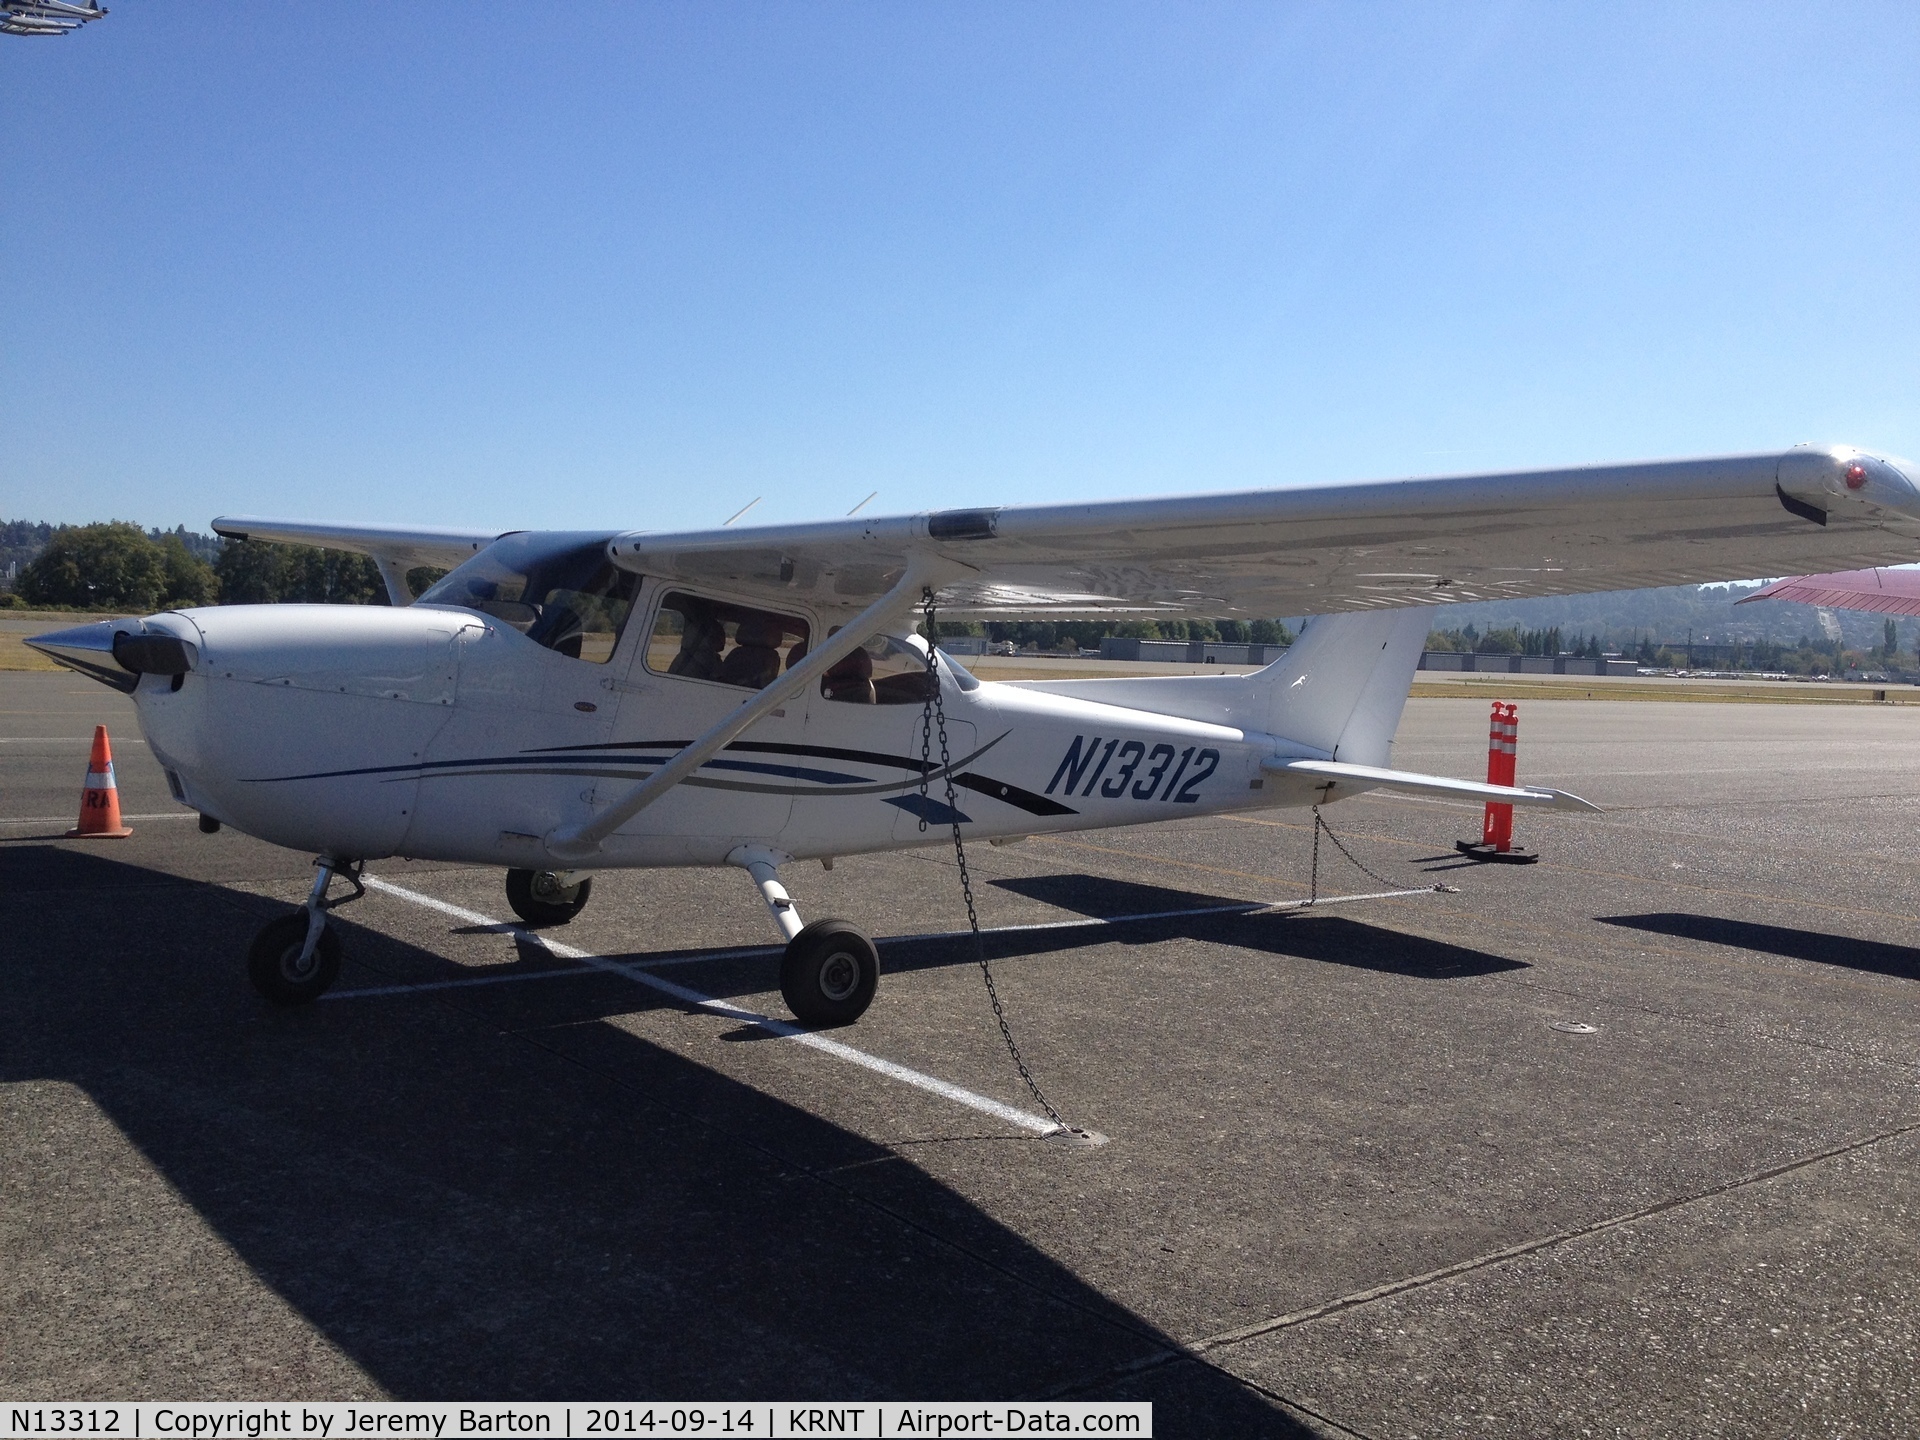 N13312, 2006 Cessna 172S C/N 172S10401, N13312 with tie-down chains still attached.